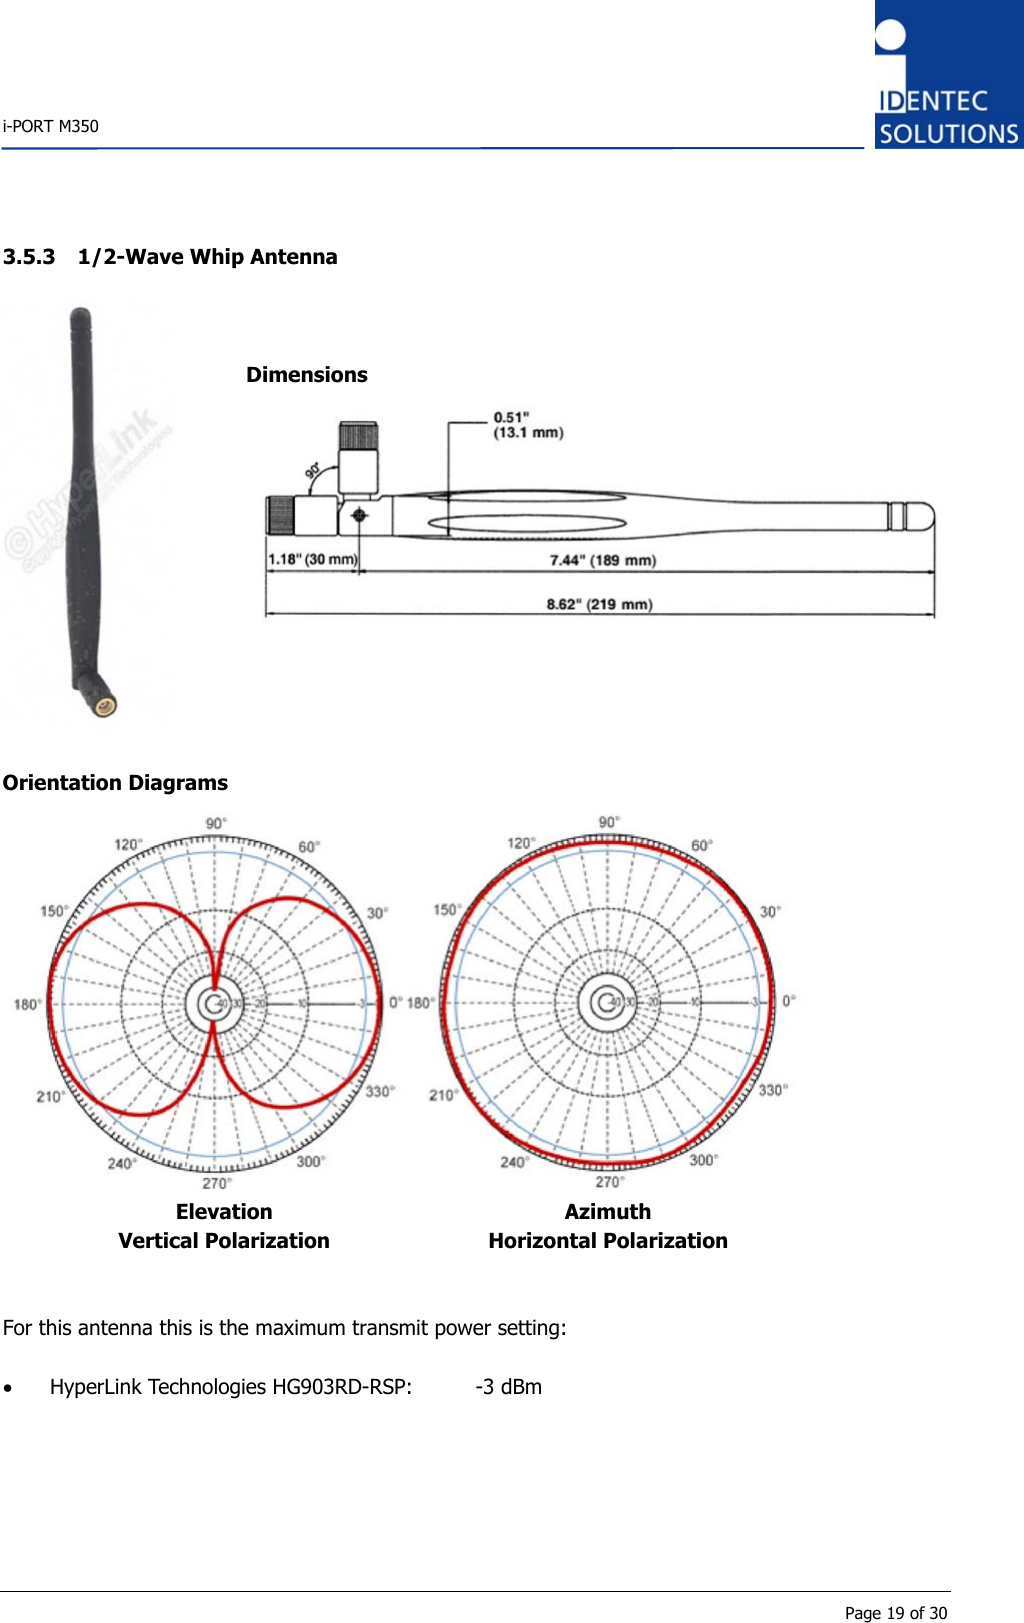    i-PORT M350       Page 19 of 30 3.5.3 1/2-Wave Whip Antenna     Dimensions   Orientation Diagrams     Elevation  Azimuth    Vertical Polarization  Horizontal Polarization   For this antenna this is the maximum transmit power setting:  • HyperLink Technologies HG903RD-RSP:    -3 dBm   